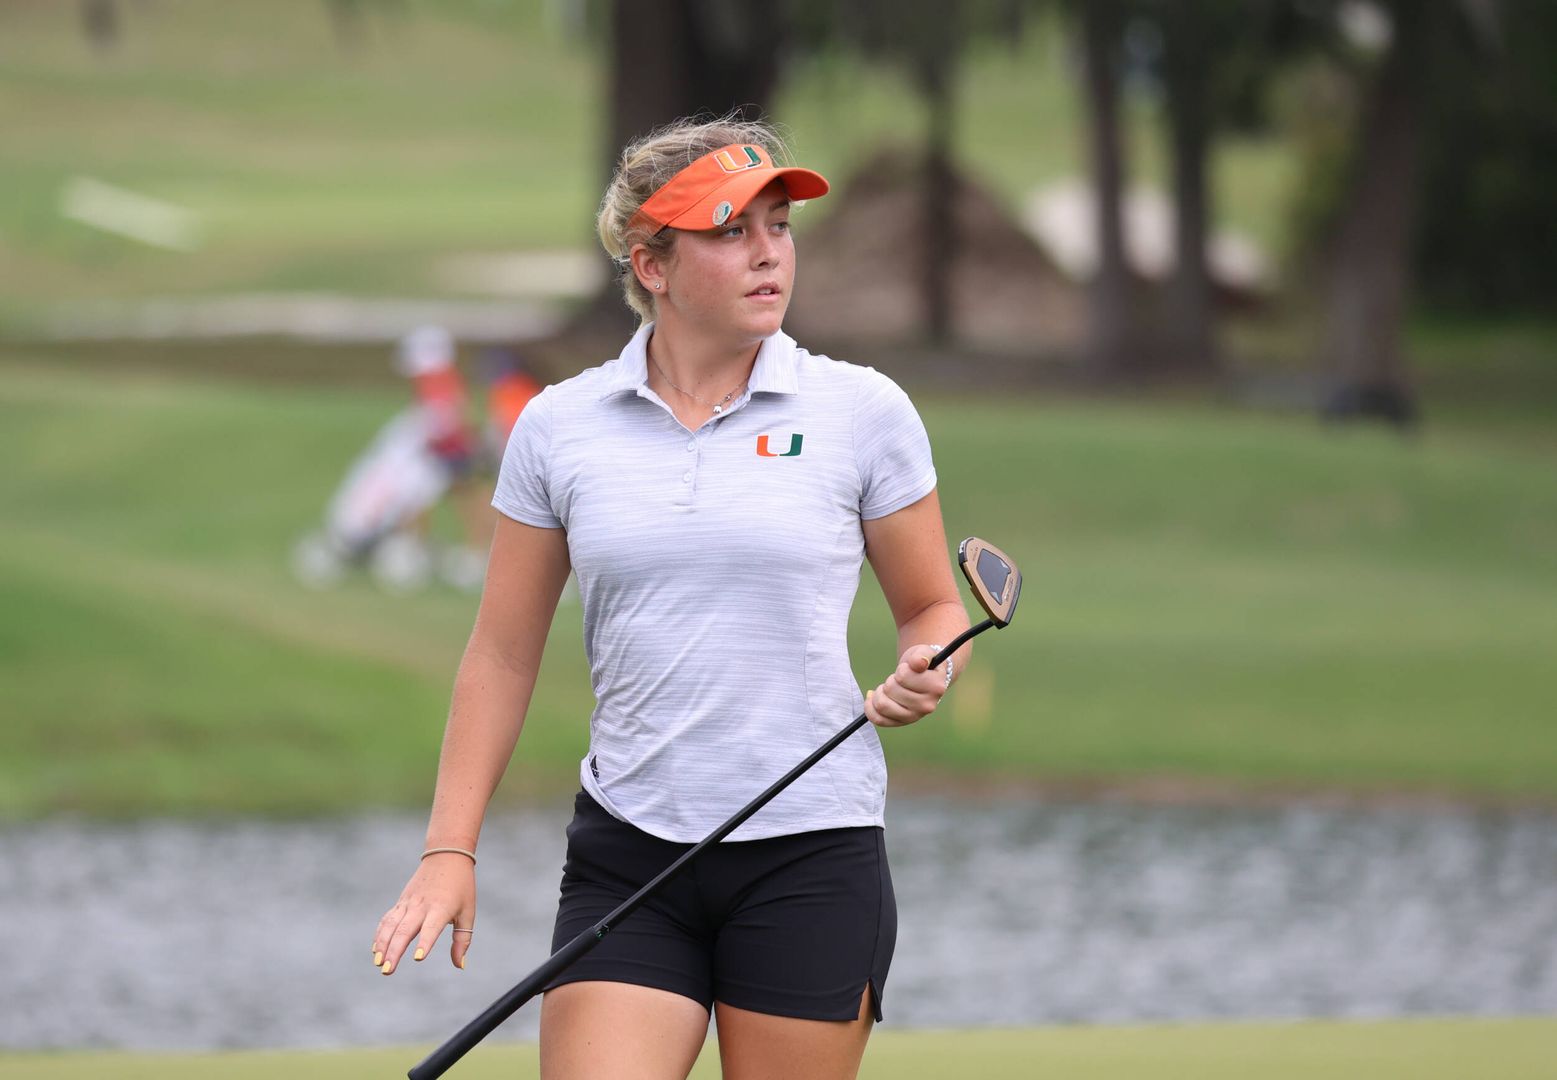 Byrne Notches Top-10 Finish at the Briar’s Creek Invitational